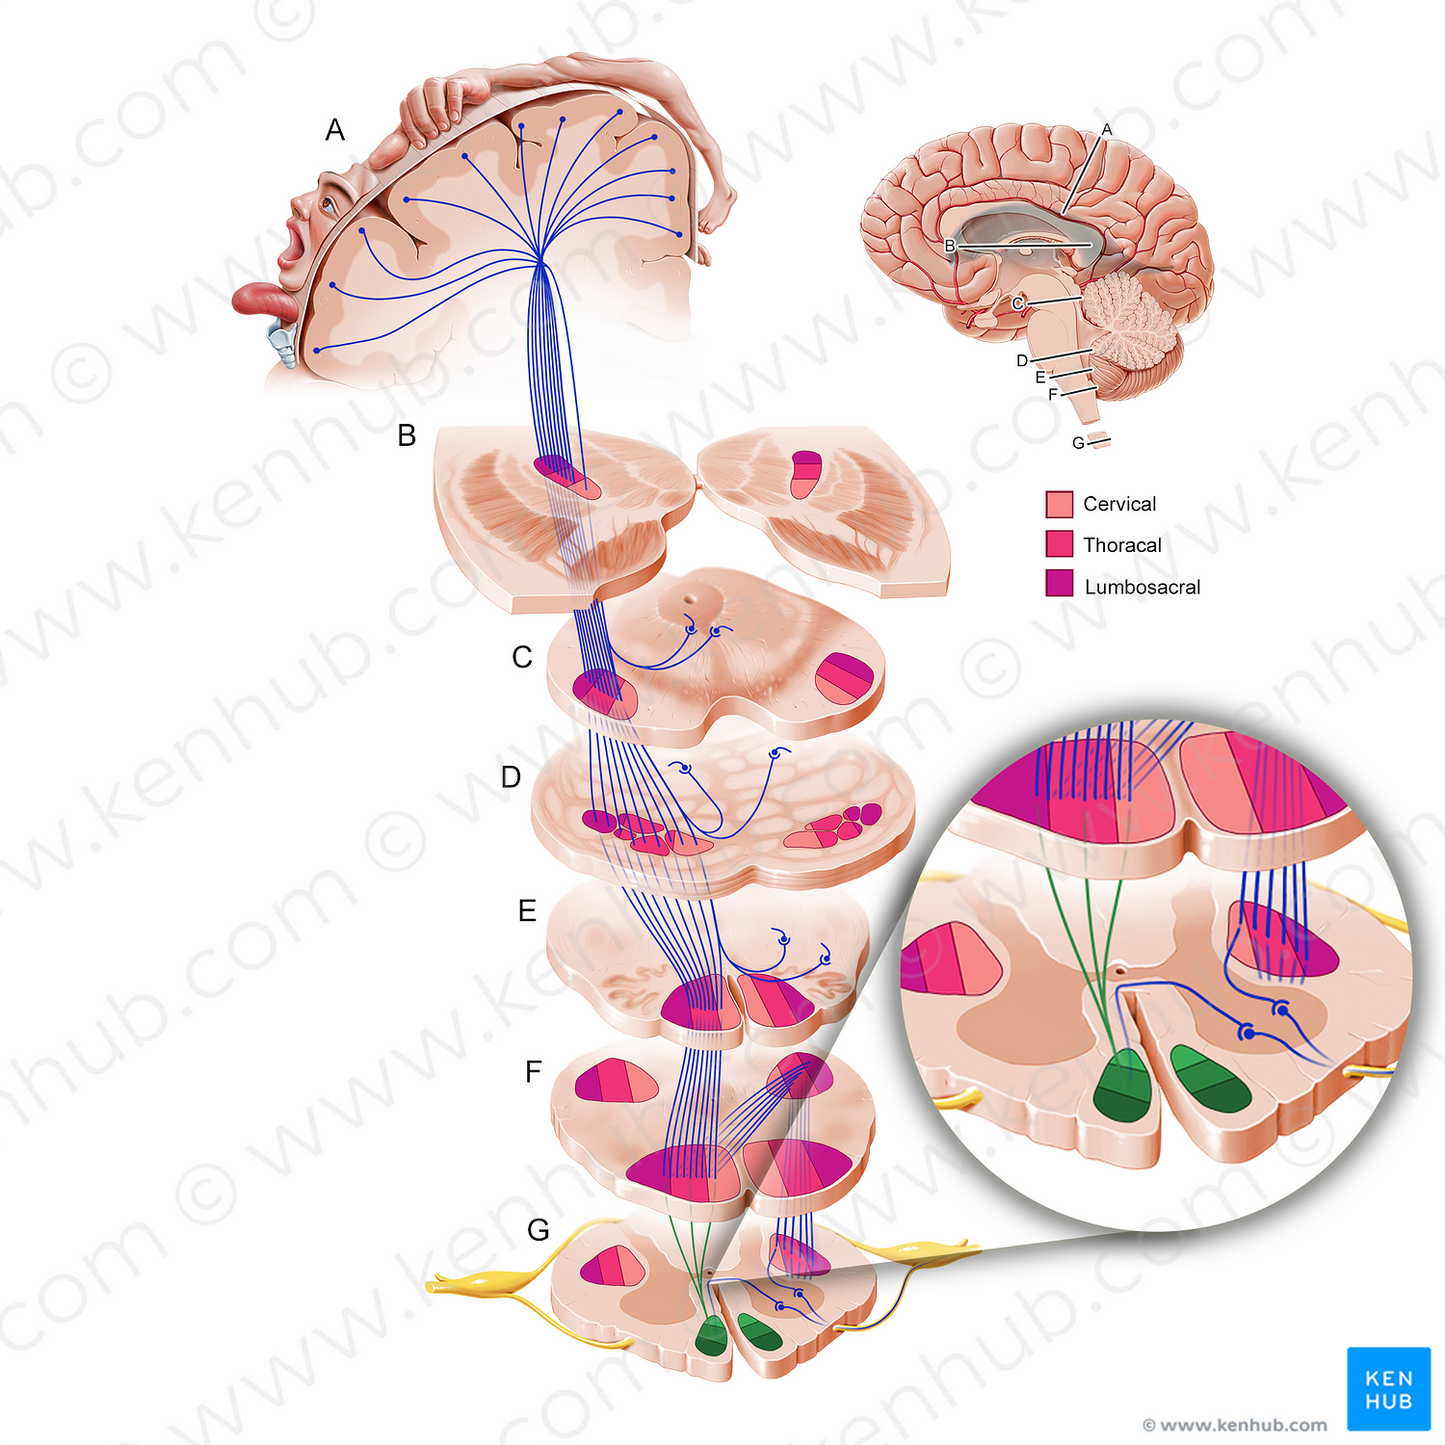 Anterior corticospinal tract (#11203)